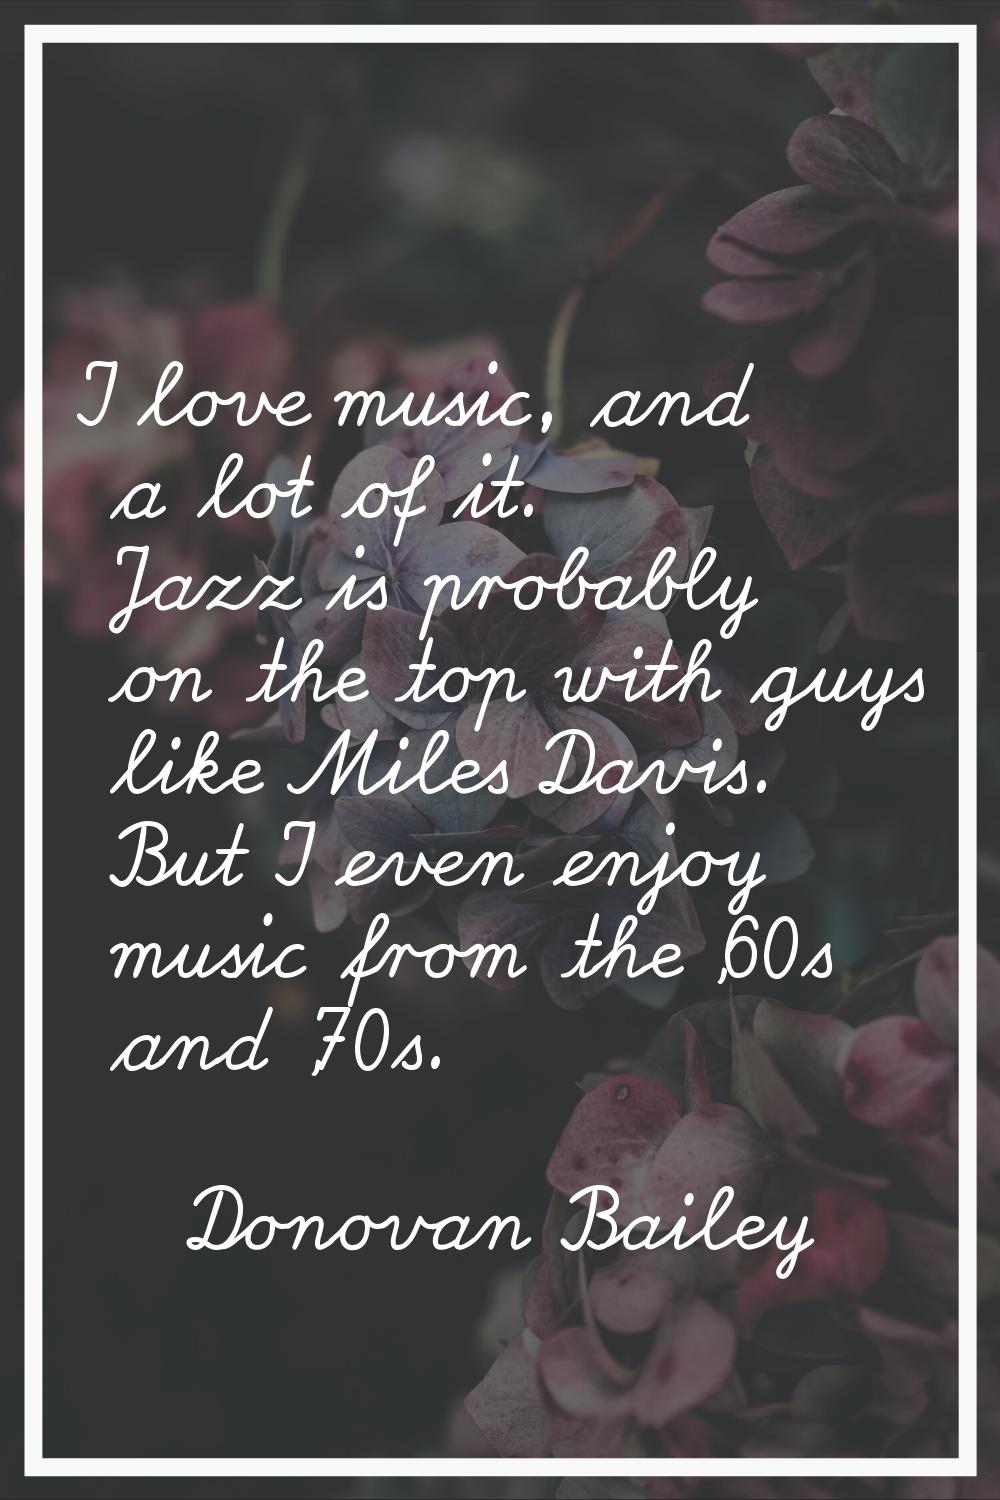 I love music, and a lot of it. Jazz is probably on the top with guys like Miles Davis. But I even e